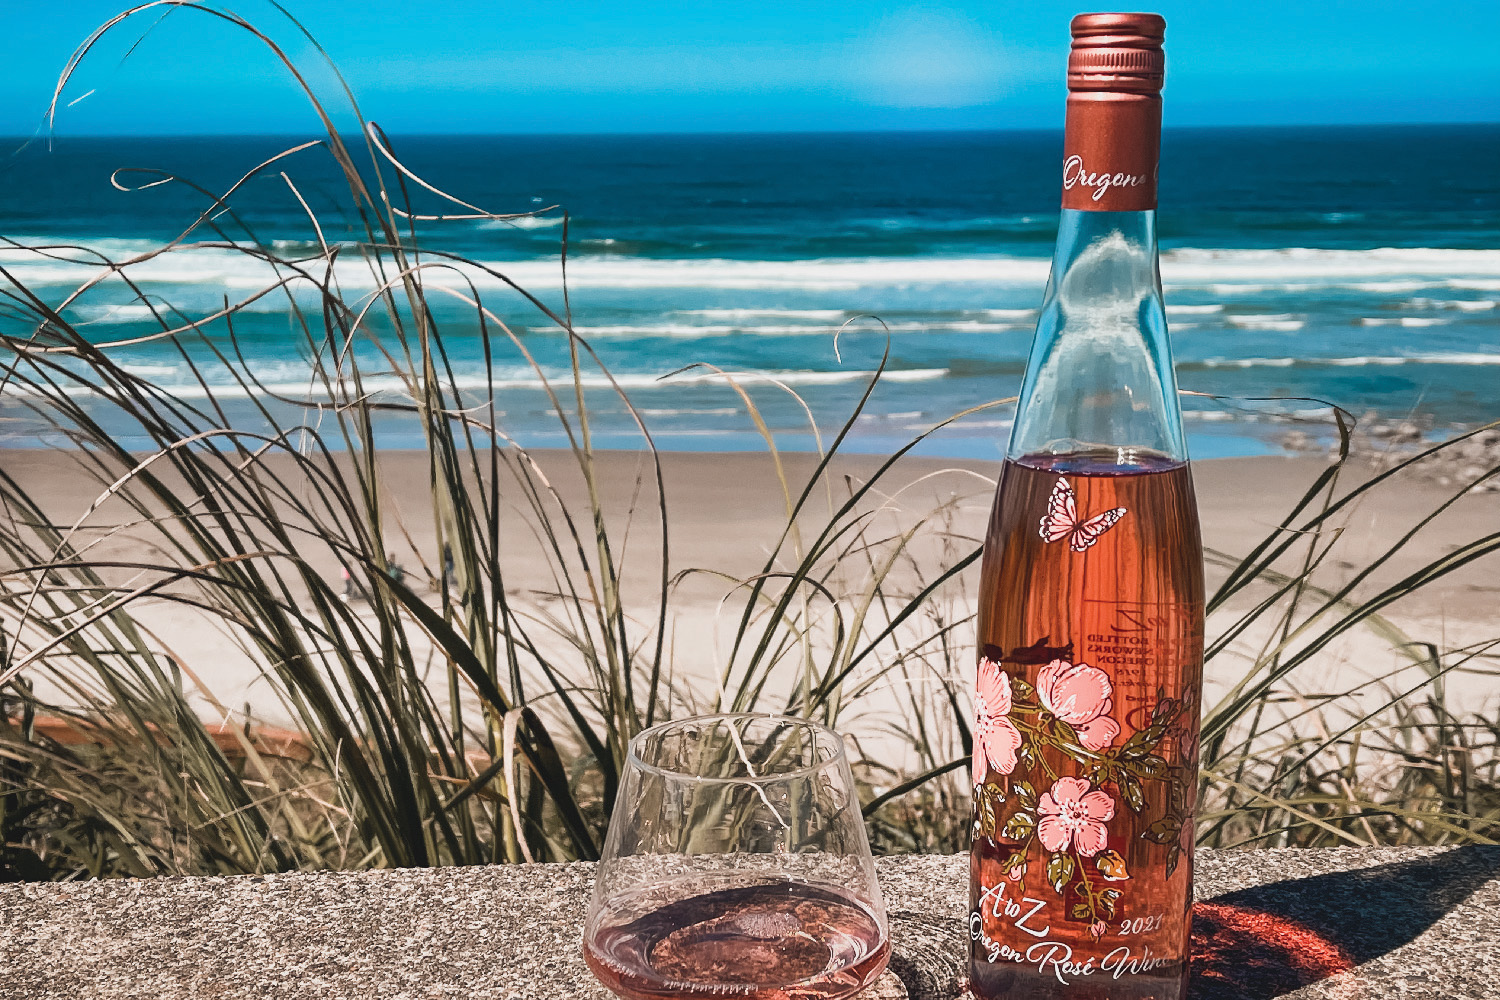 A to Z rose wine at beach